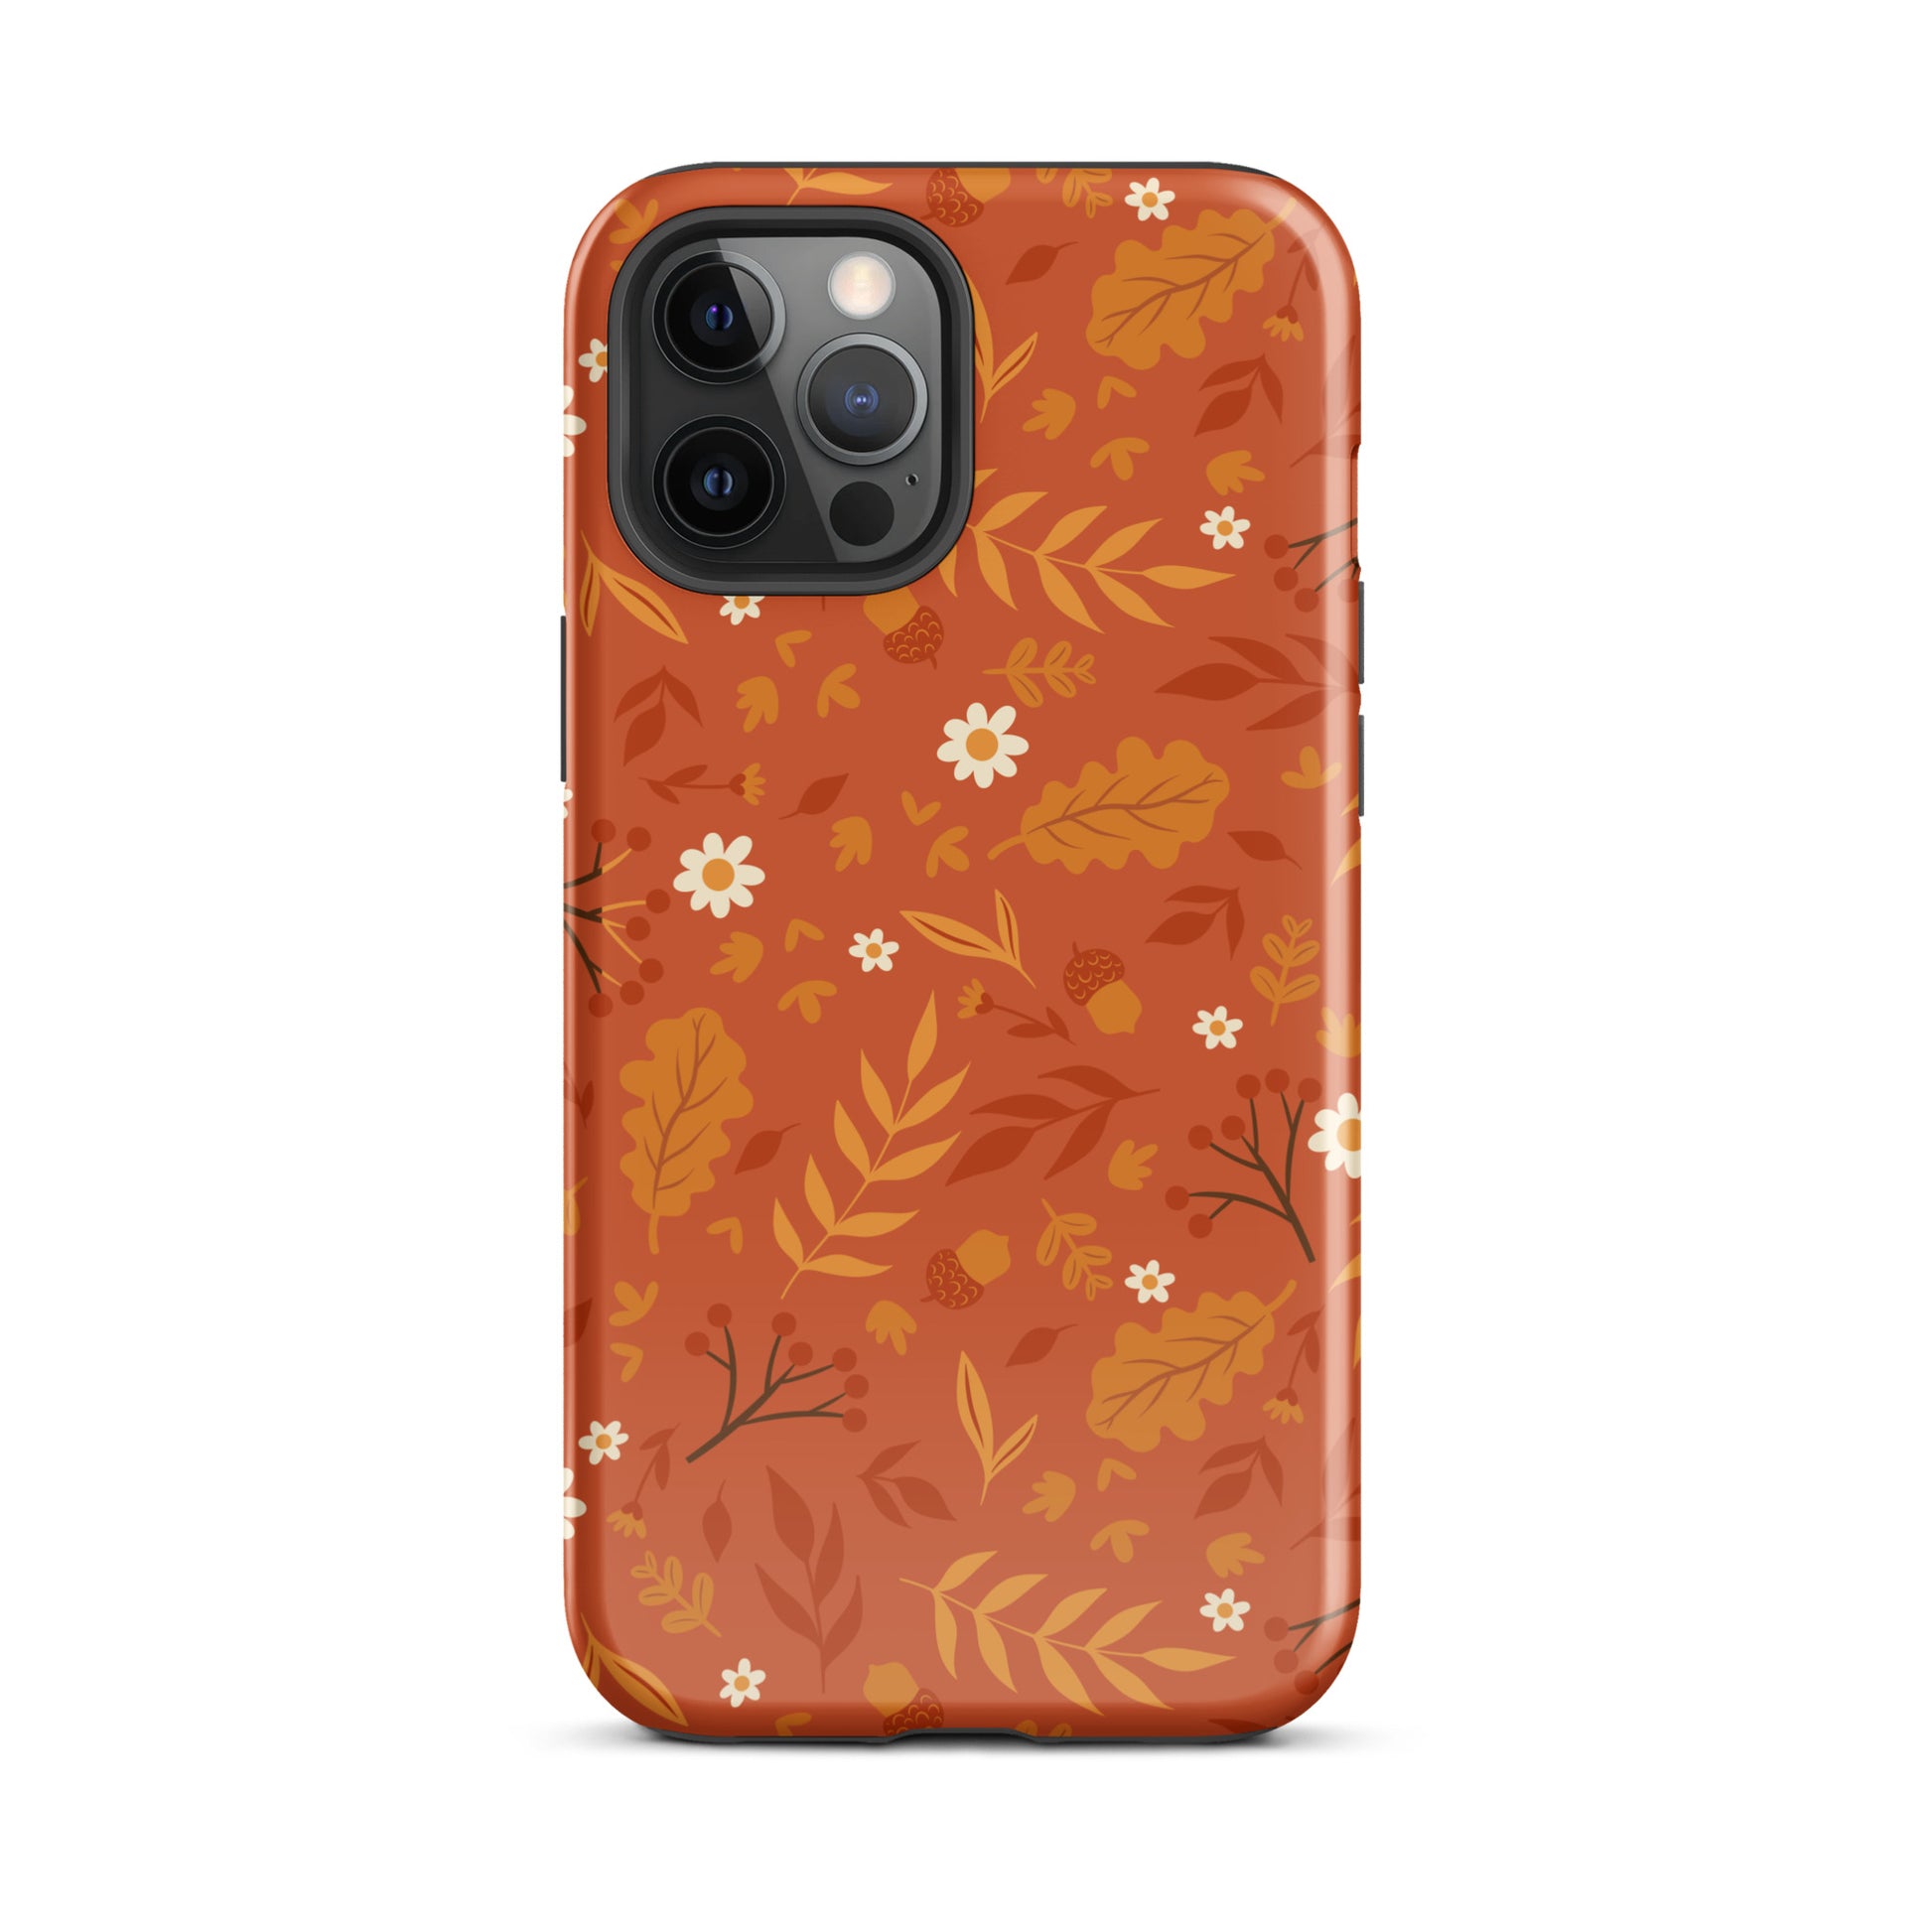 Floral Harvest iPhone Case iPhone 12 Pro Max Glossy